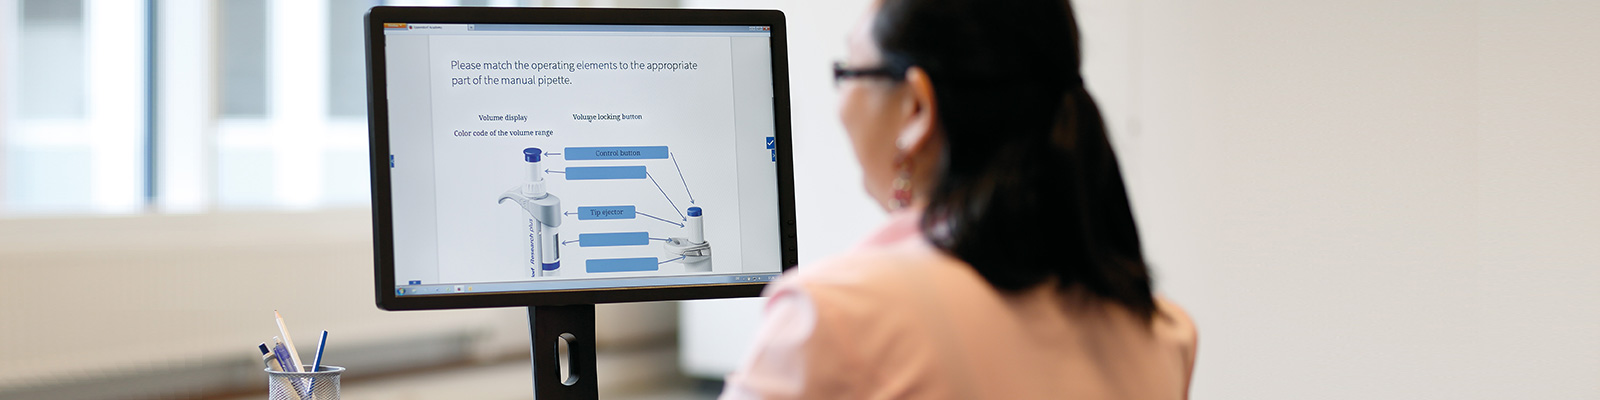 case study lms customer reference eppendorf ag